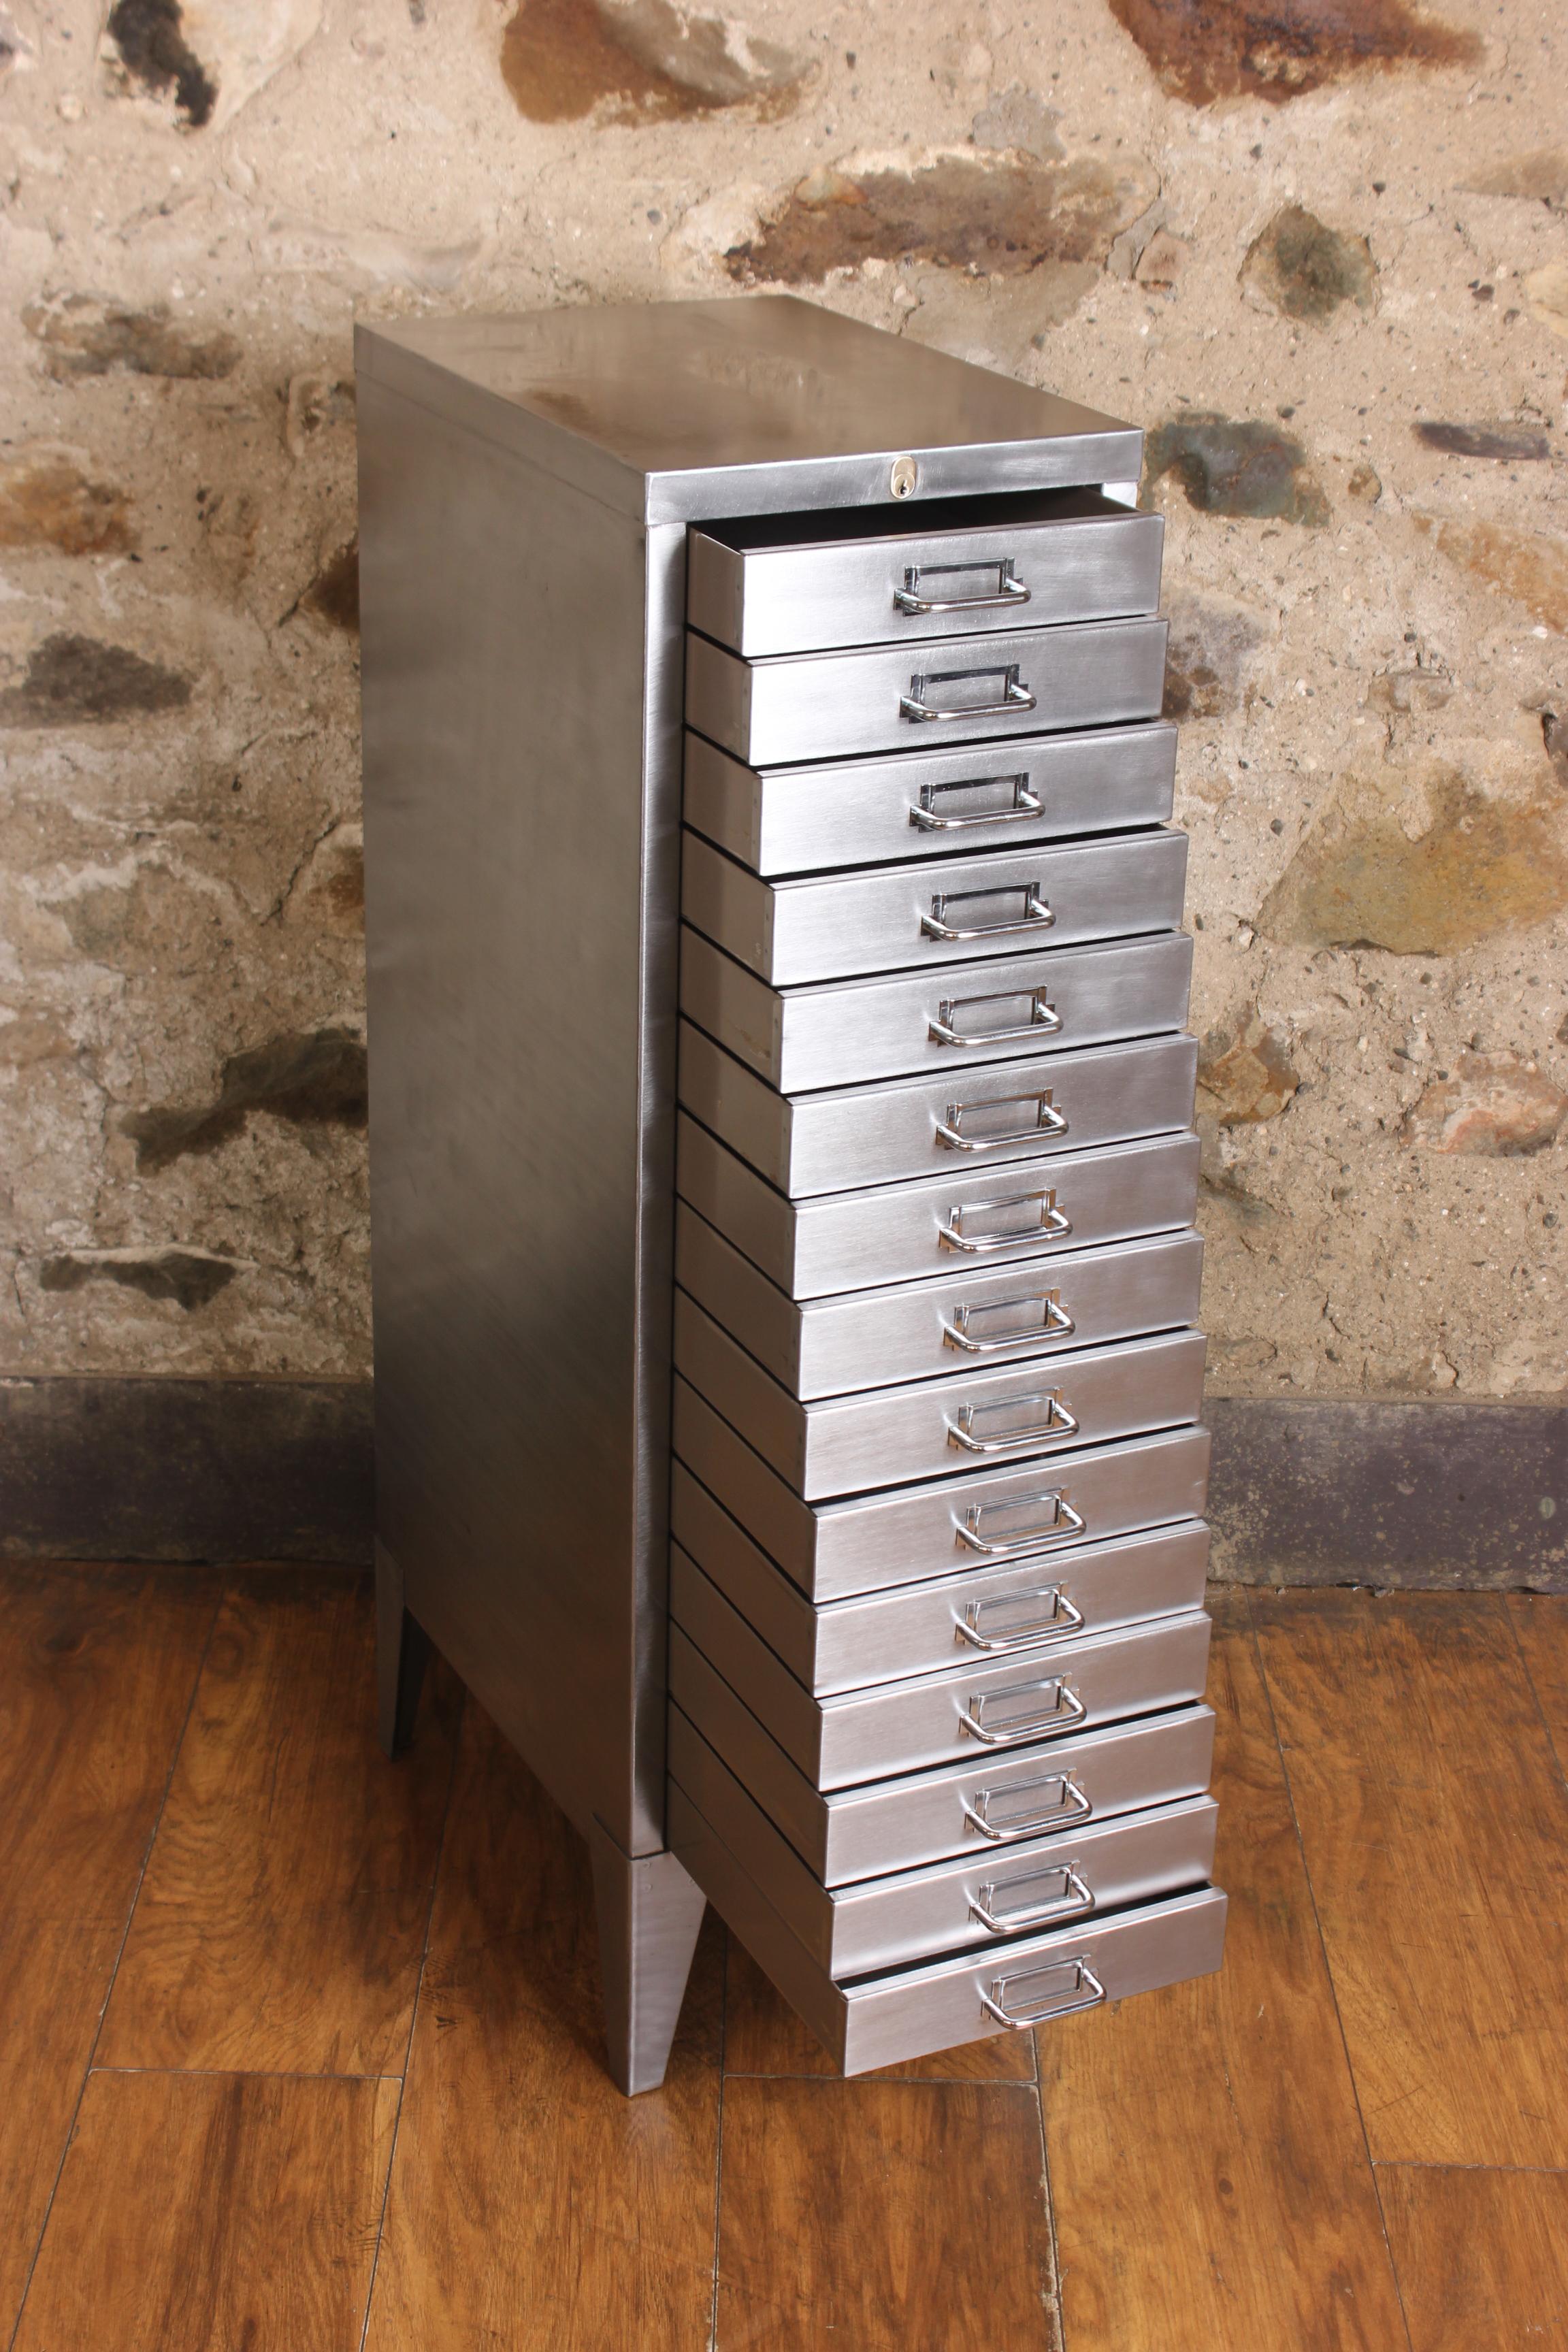 A stunning vintage 1950s industrial stripped metal 15-drawer filing cabinet complete with key. This impressive A4 size industrial design piece has been stripped back to bare metal and was manufactured in the United Kingdom by Stor All Steel during